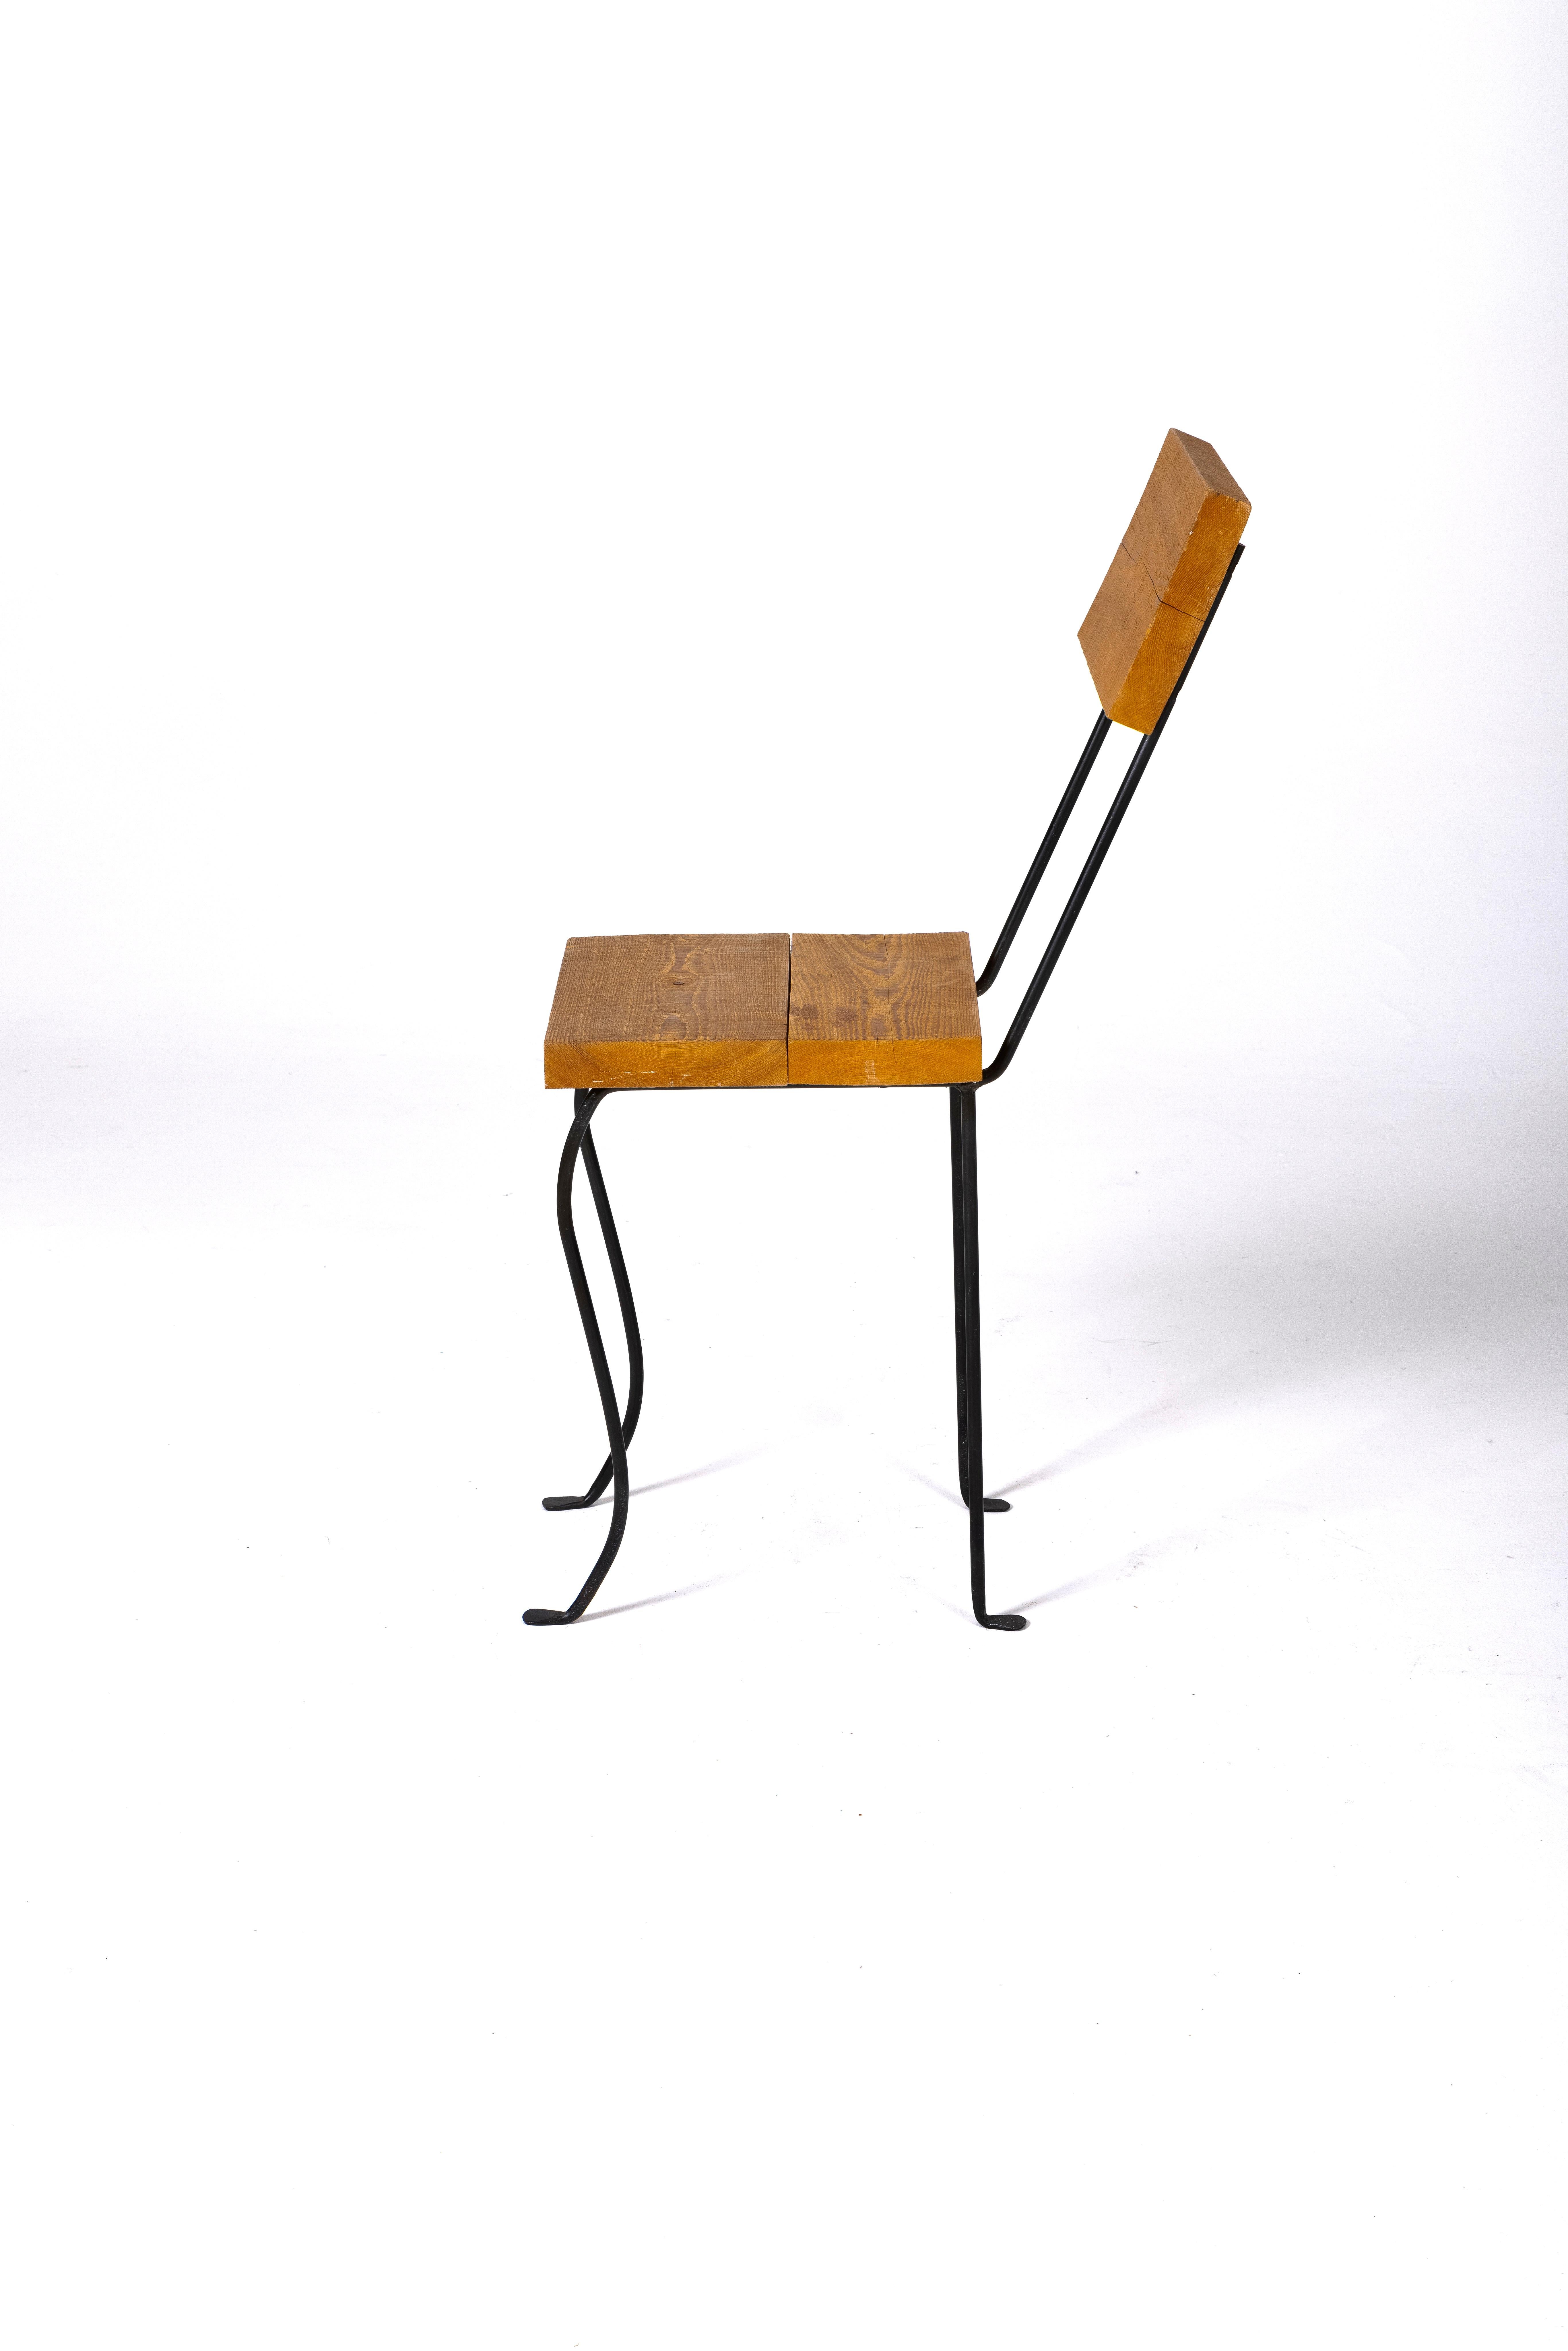 Metal Wood and metal chair by Patrice Gruffaz For Sale